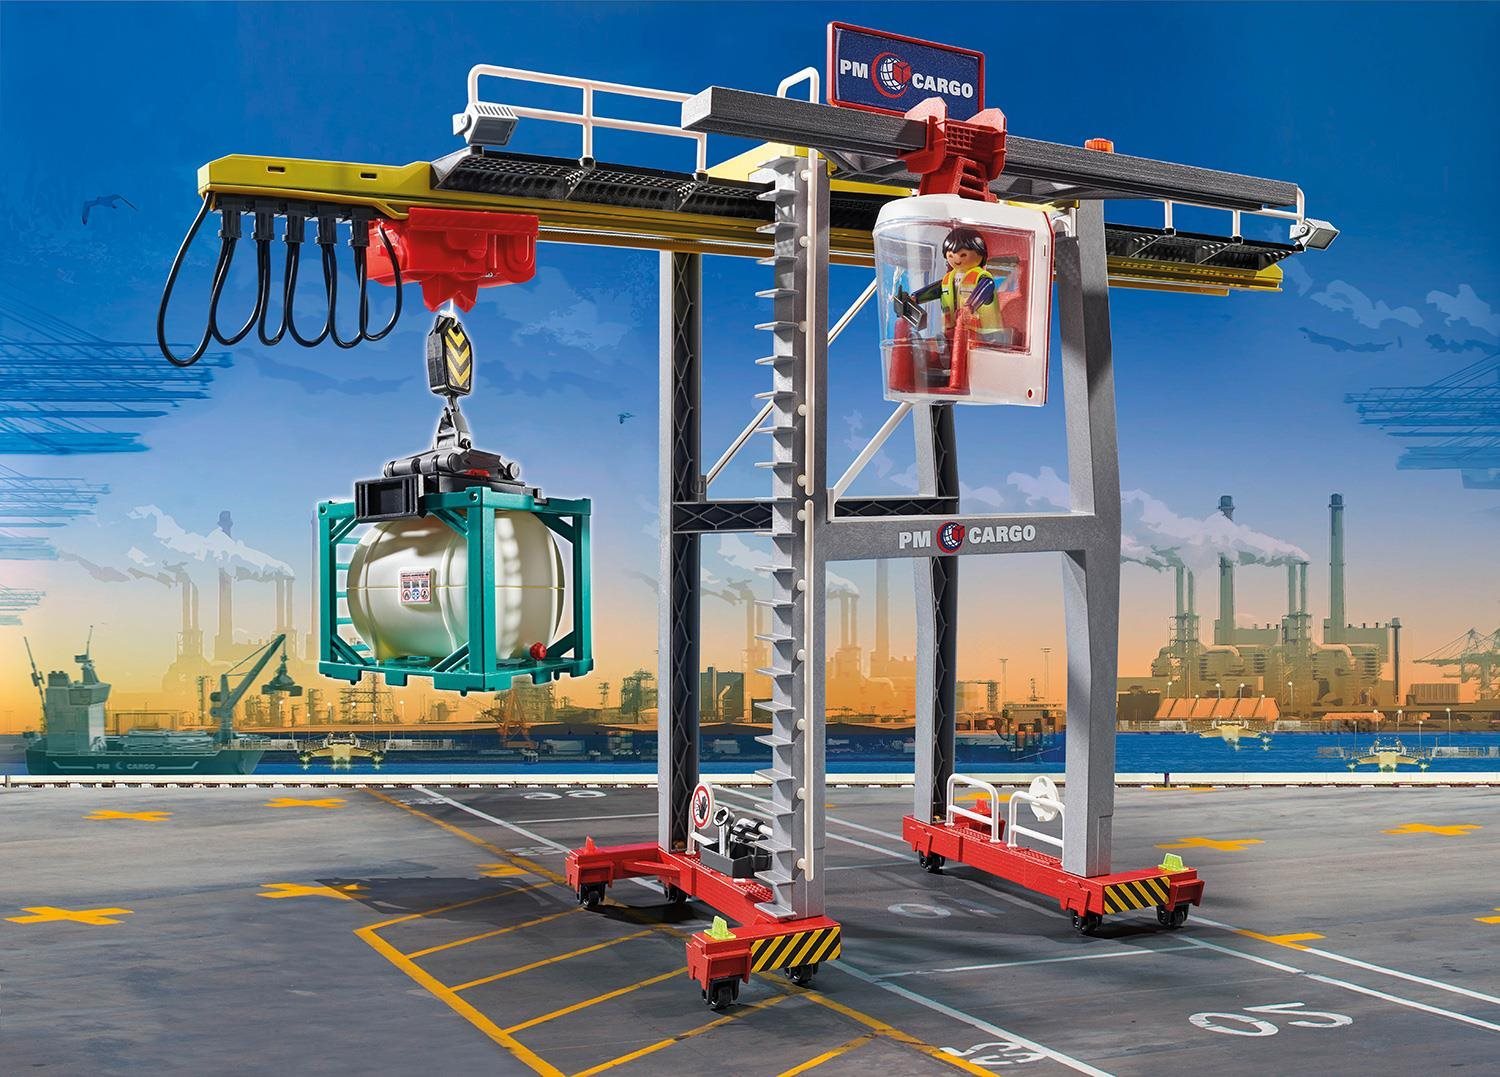 Building Set Playmobil 70770 Cargo Crane with Container Lifestyle